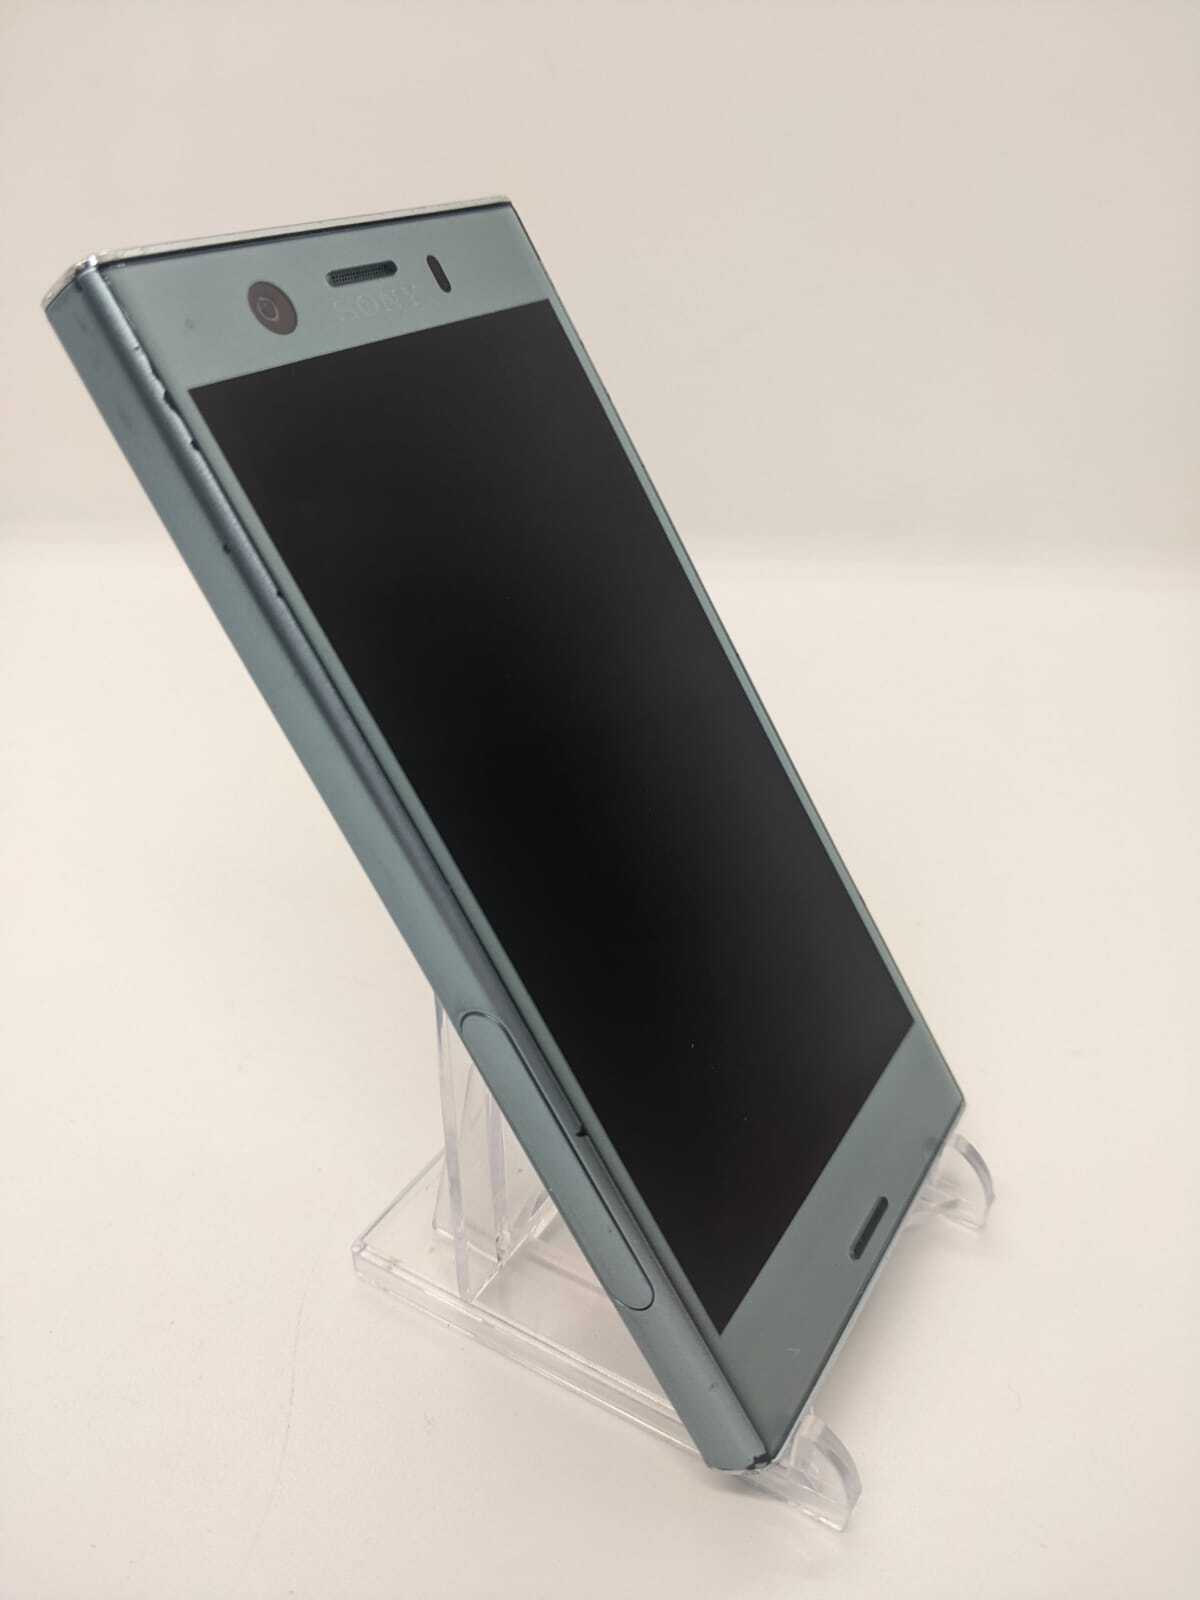 Sony Xperia XZ1 Compact 32GB Unlocked Android 4G LTE Blue Smartphone G8441